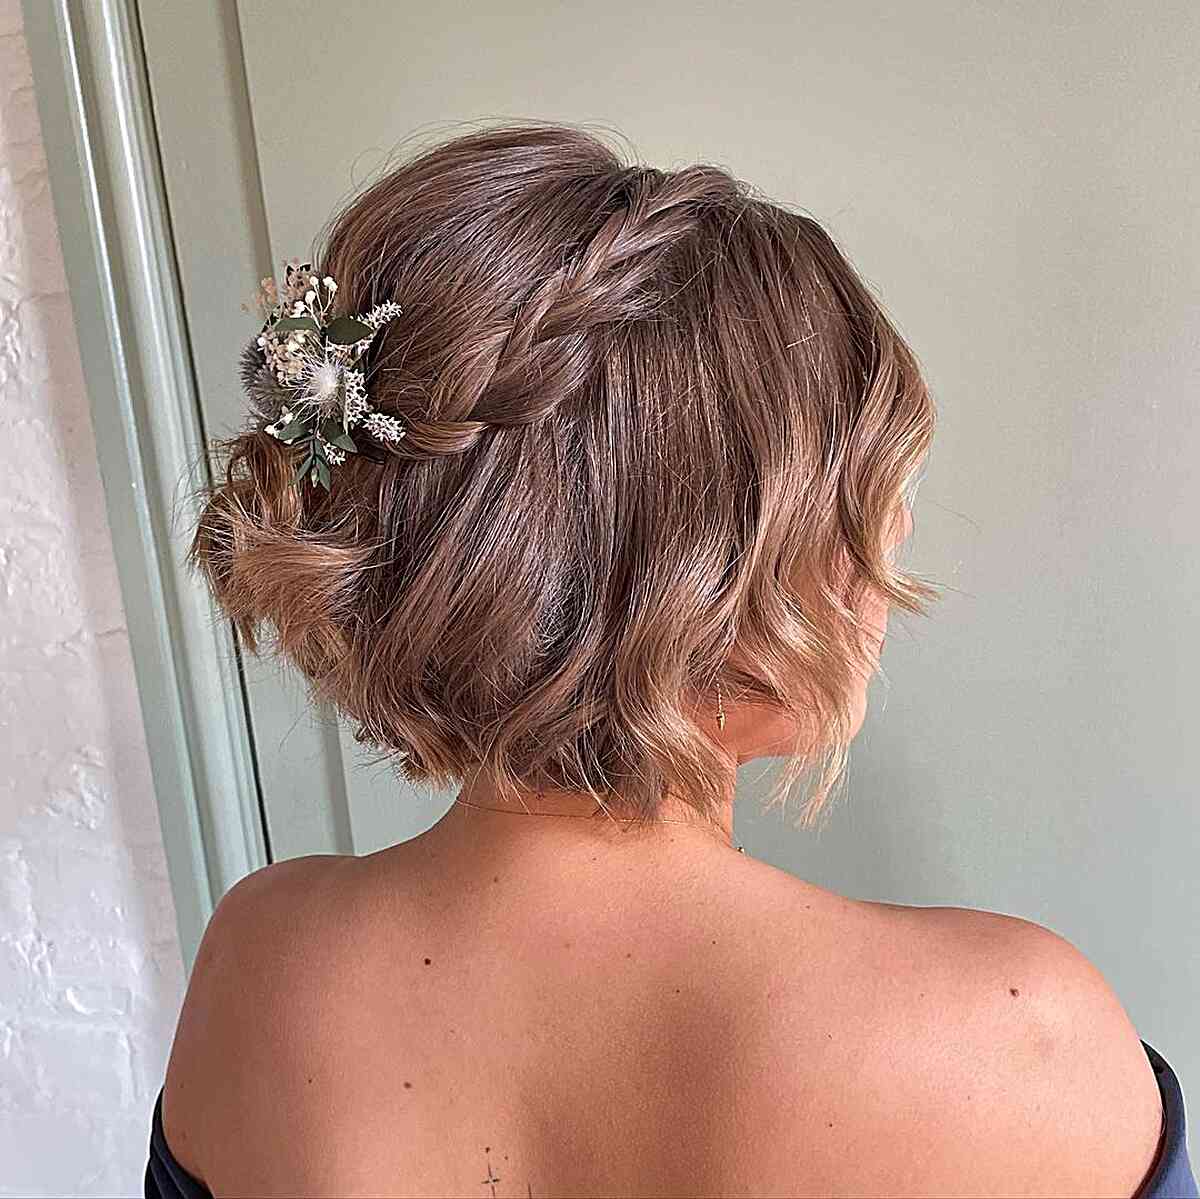 Get Inspired: 25 Wedding Hairstyles for Short Hair